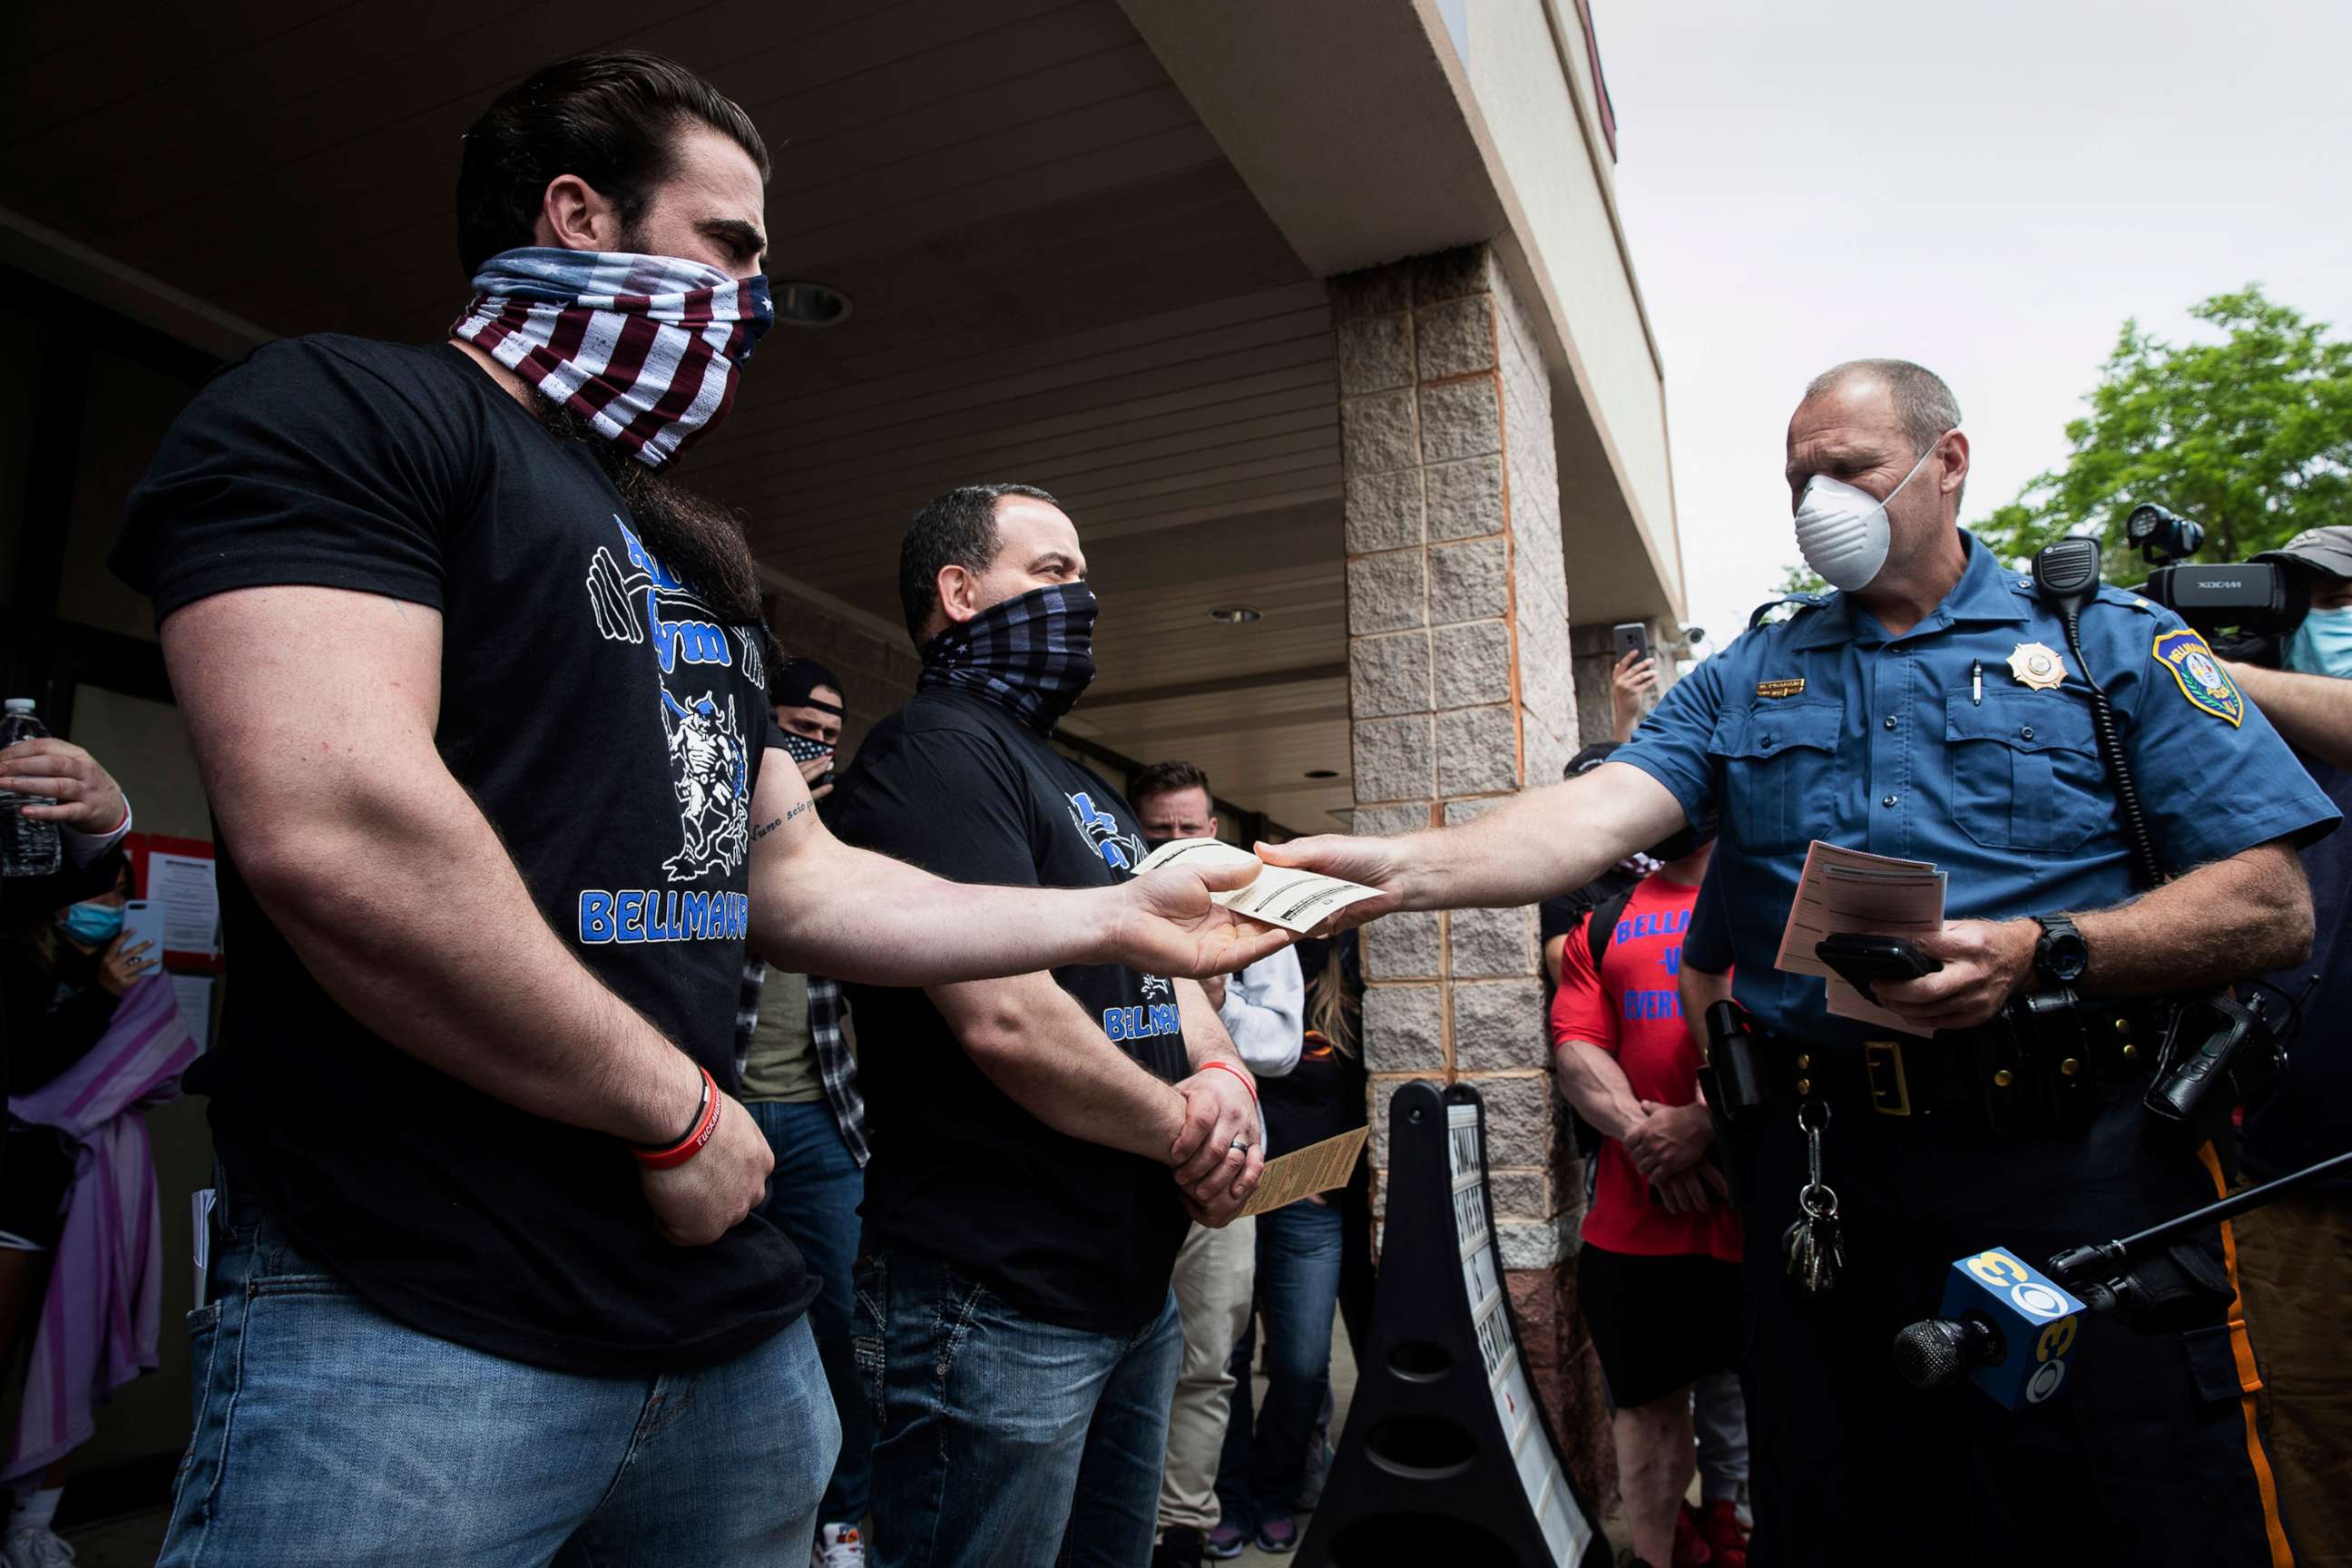 PHOTO: A police officer issues Atilis Gym co-owners Ian Smith, left, and Frank Trumbetti summons outside their gym in Bellmawr, N.J., May 18, 2020, for defying a state order that shut down nonessential businesses.